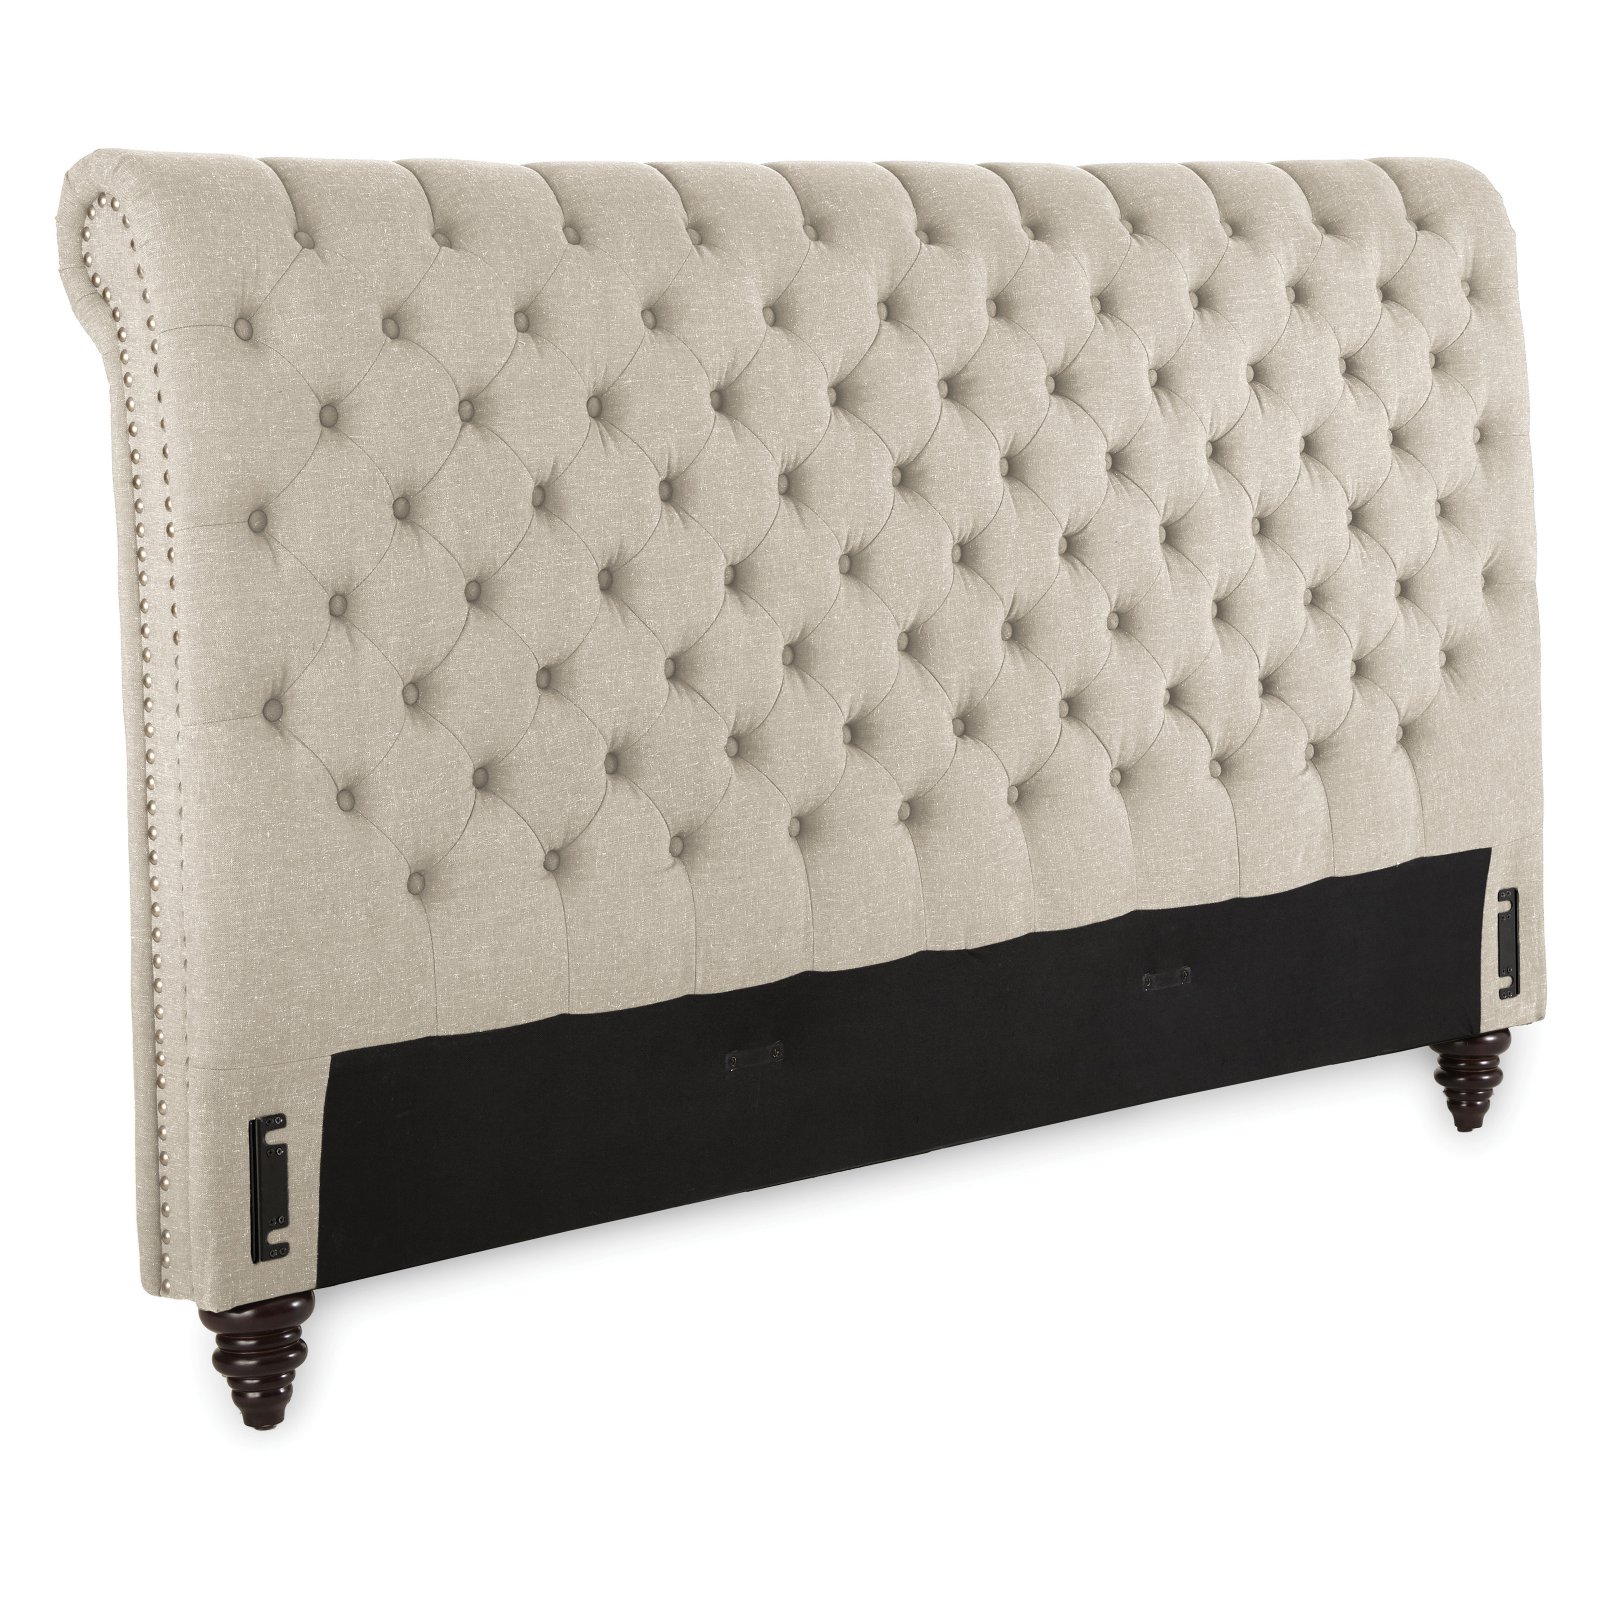 Swanson Tufted King Sleigh Bed in Sand Beige Upholstery - image 5 of 10